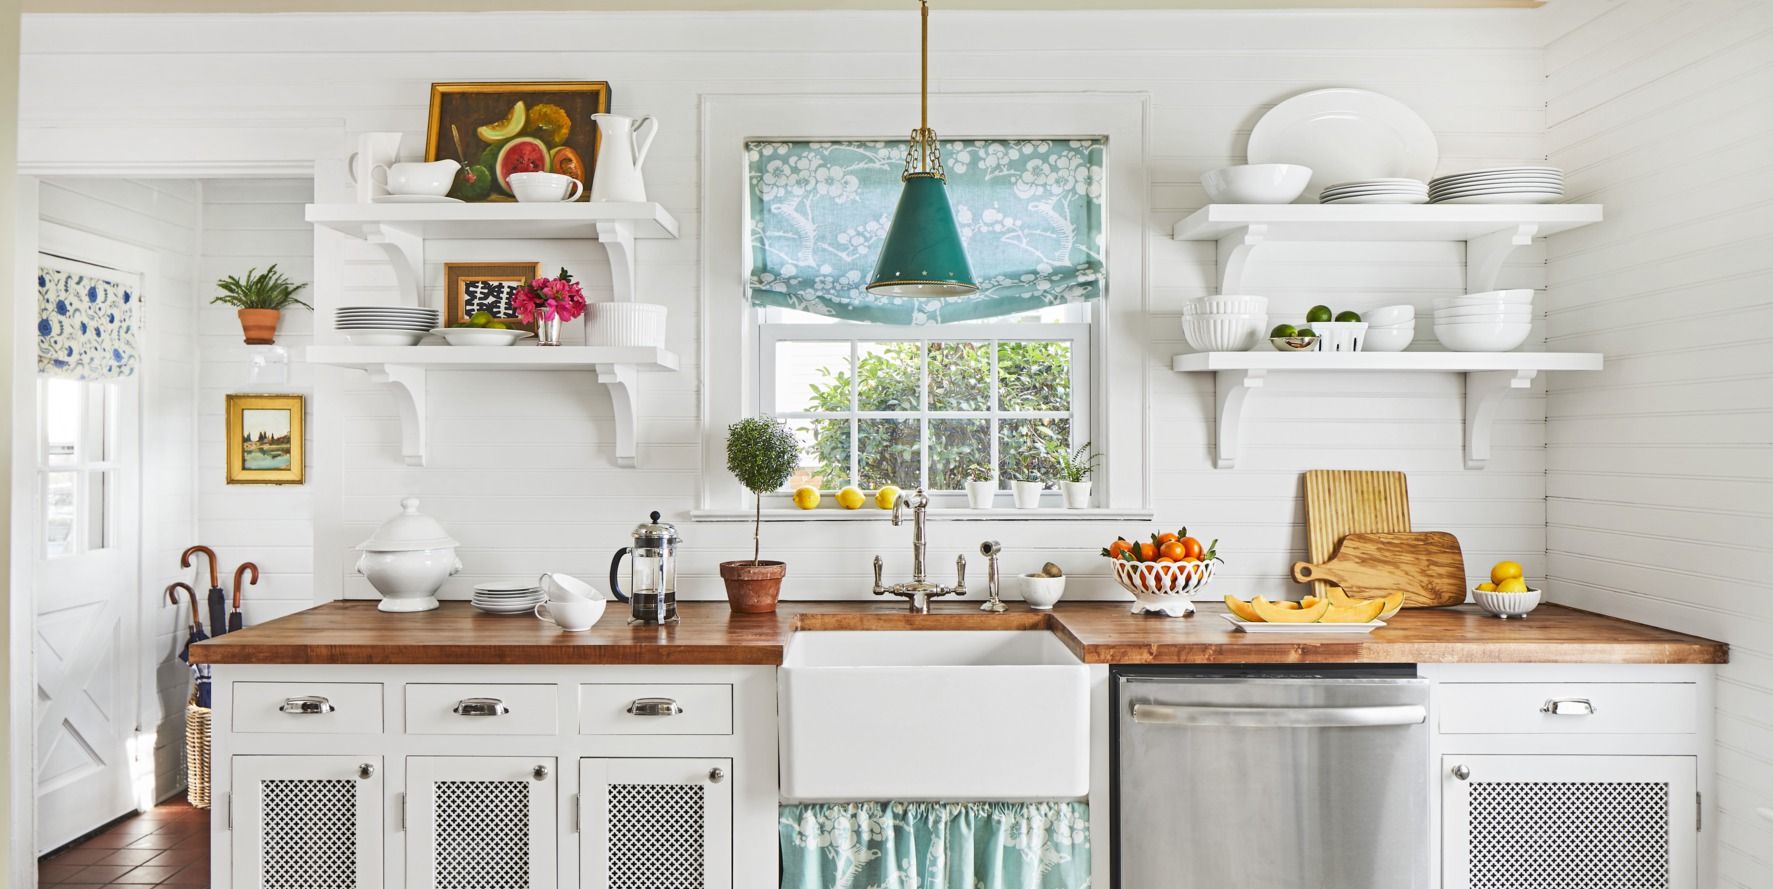 45 Best Kitchen Remodel Ideas That Will Spruce Up Any Space